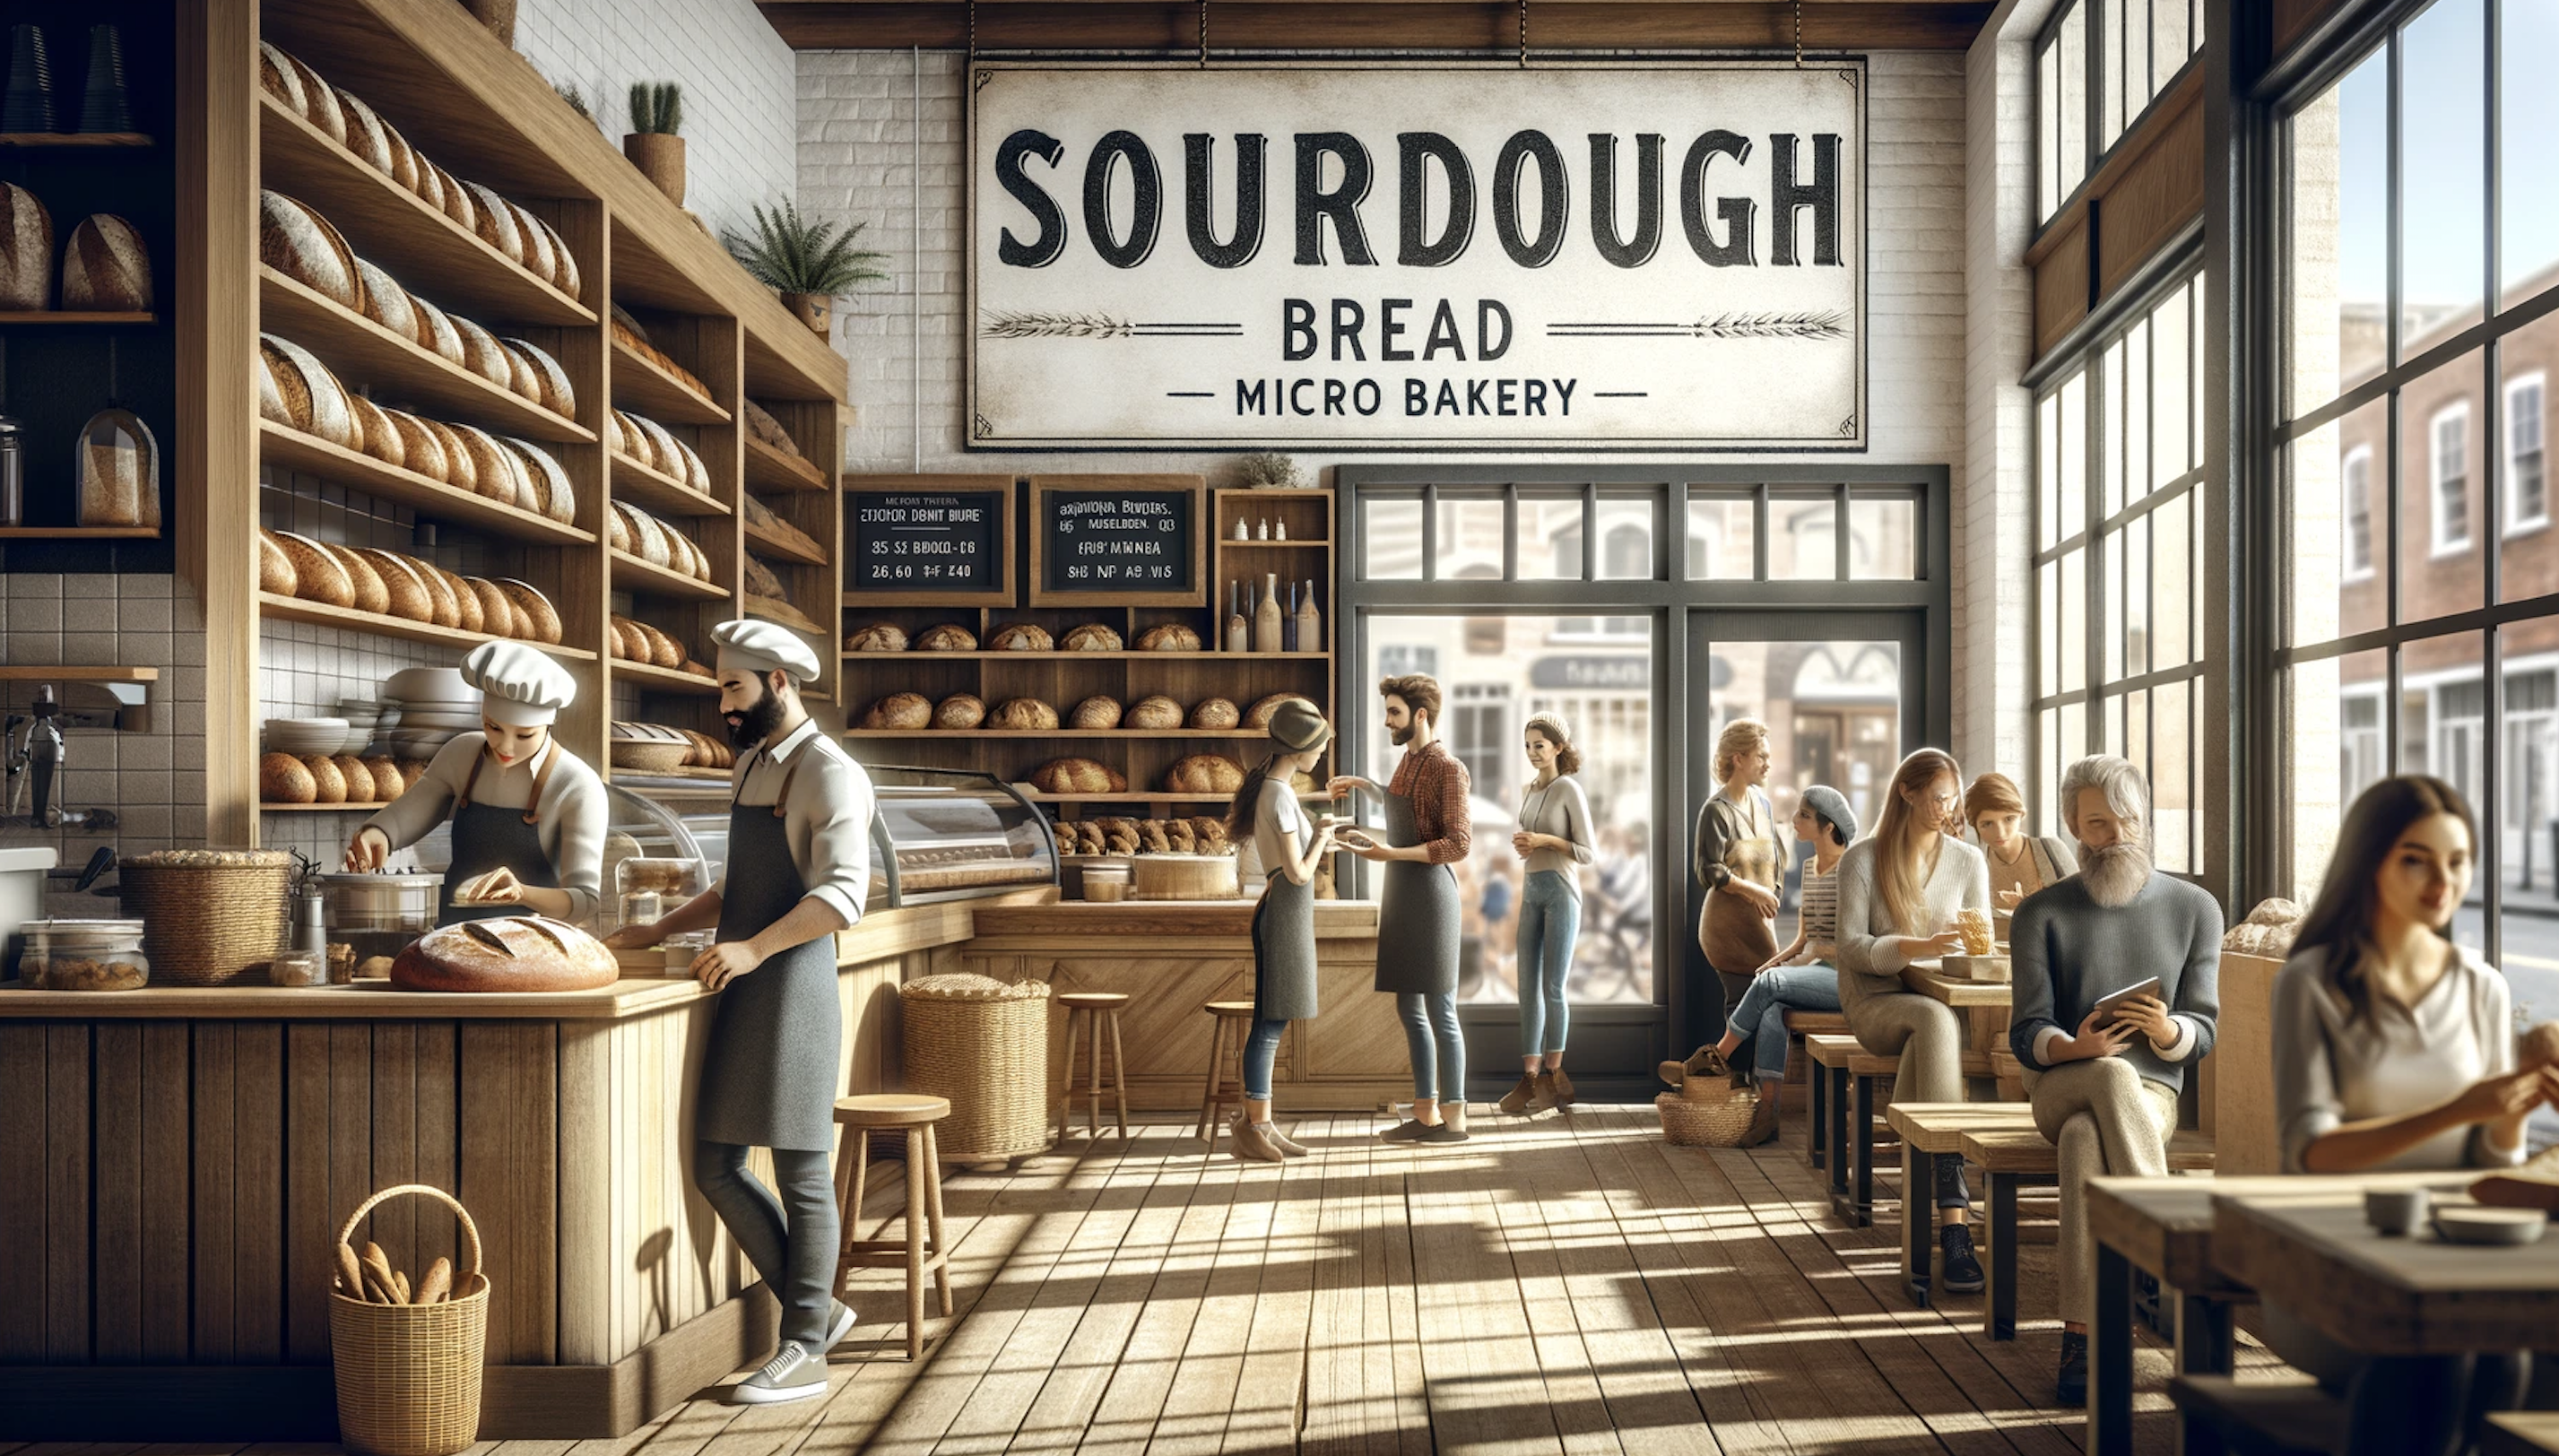 sourdough marketing strategies for local micro bakeries home bakers flour mills and sourdough bread businesses